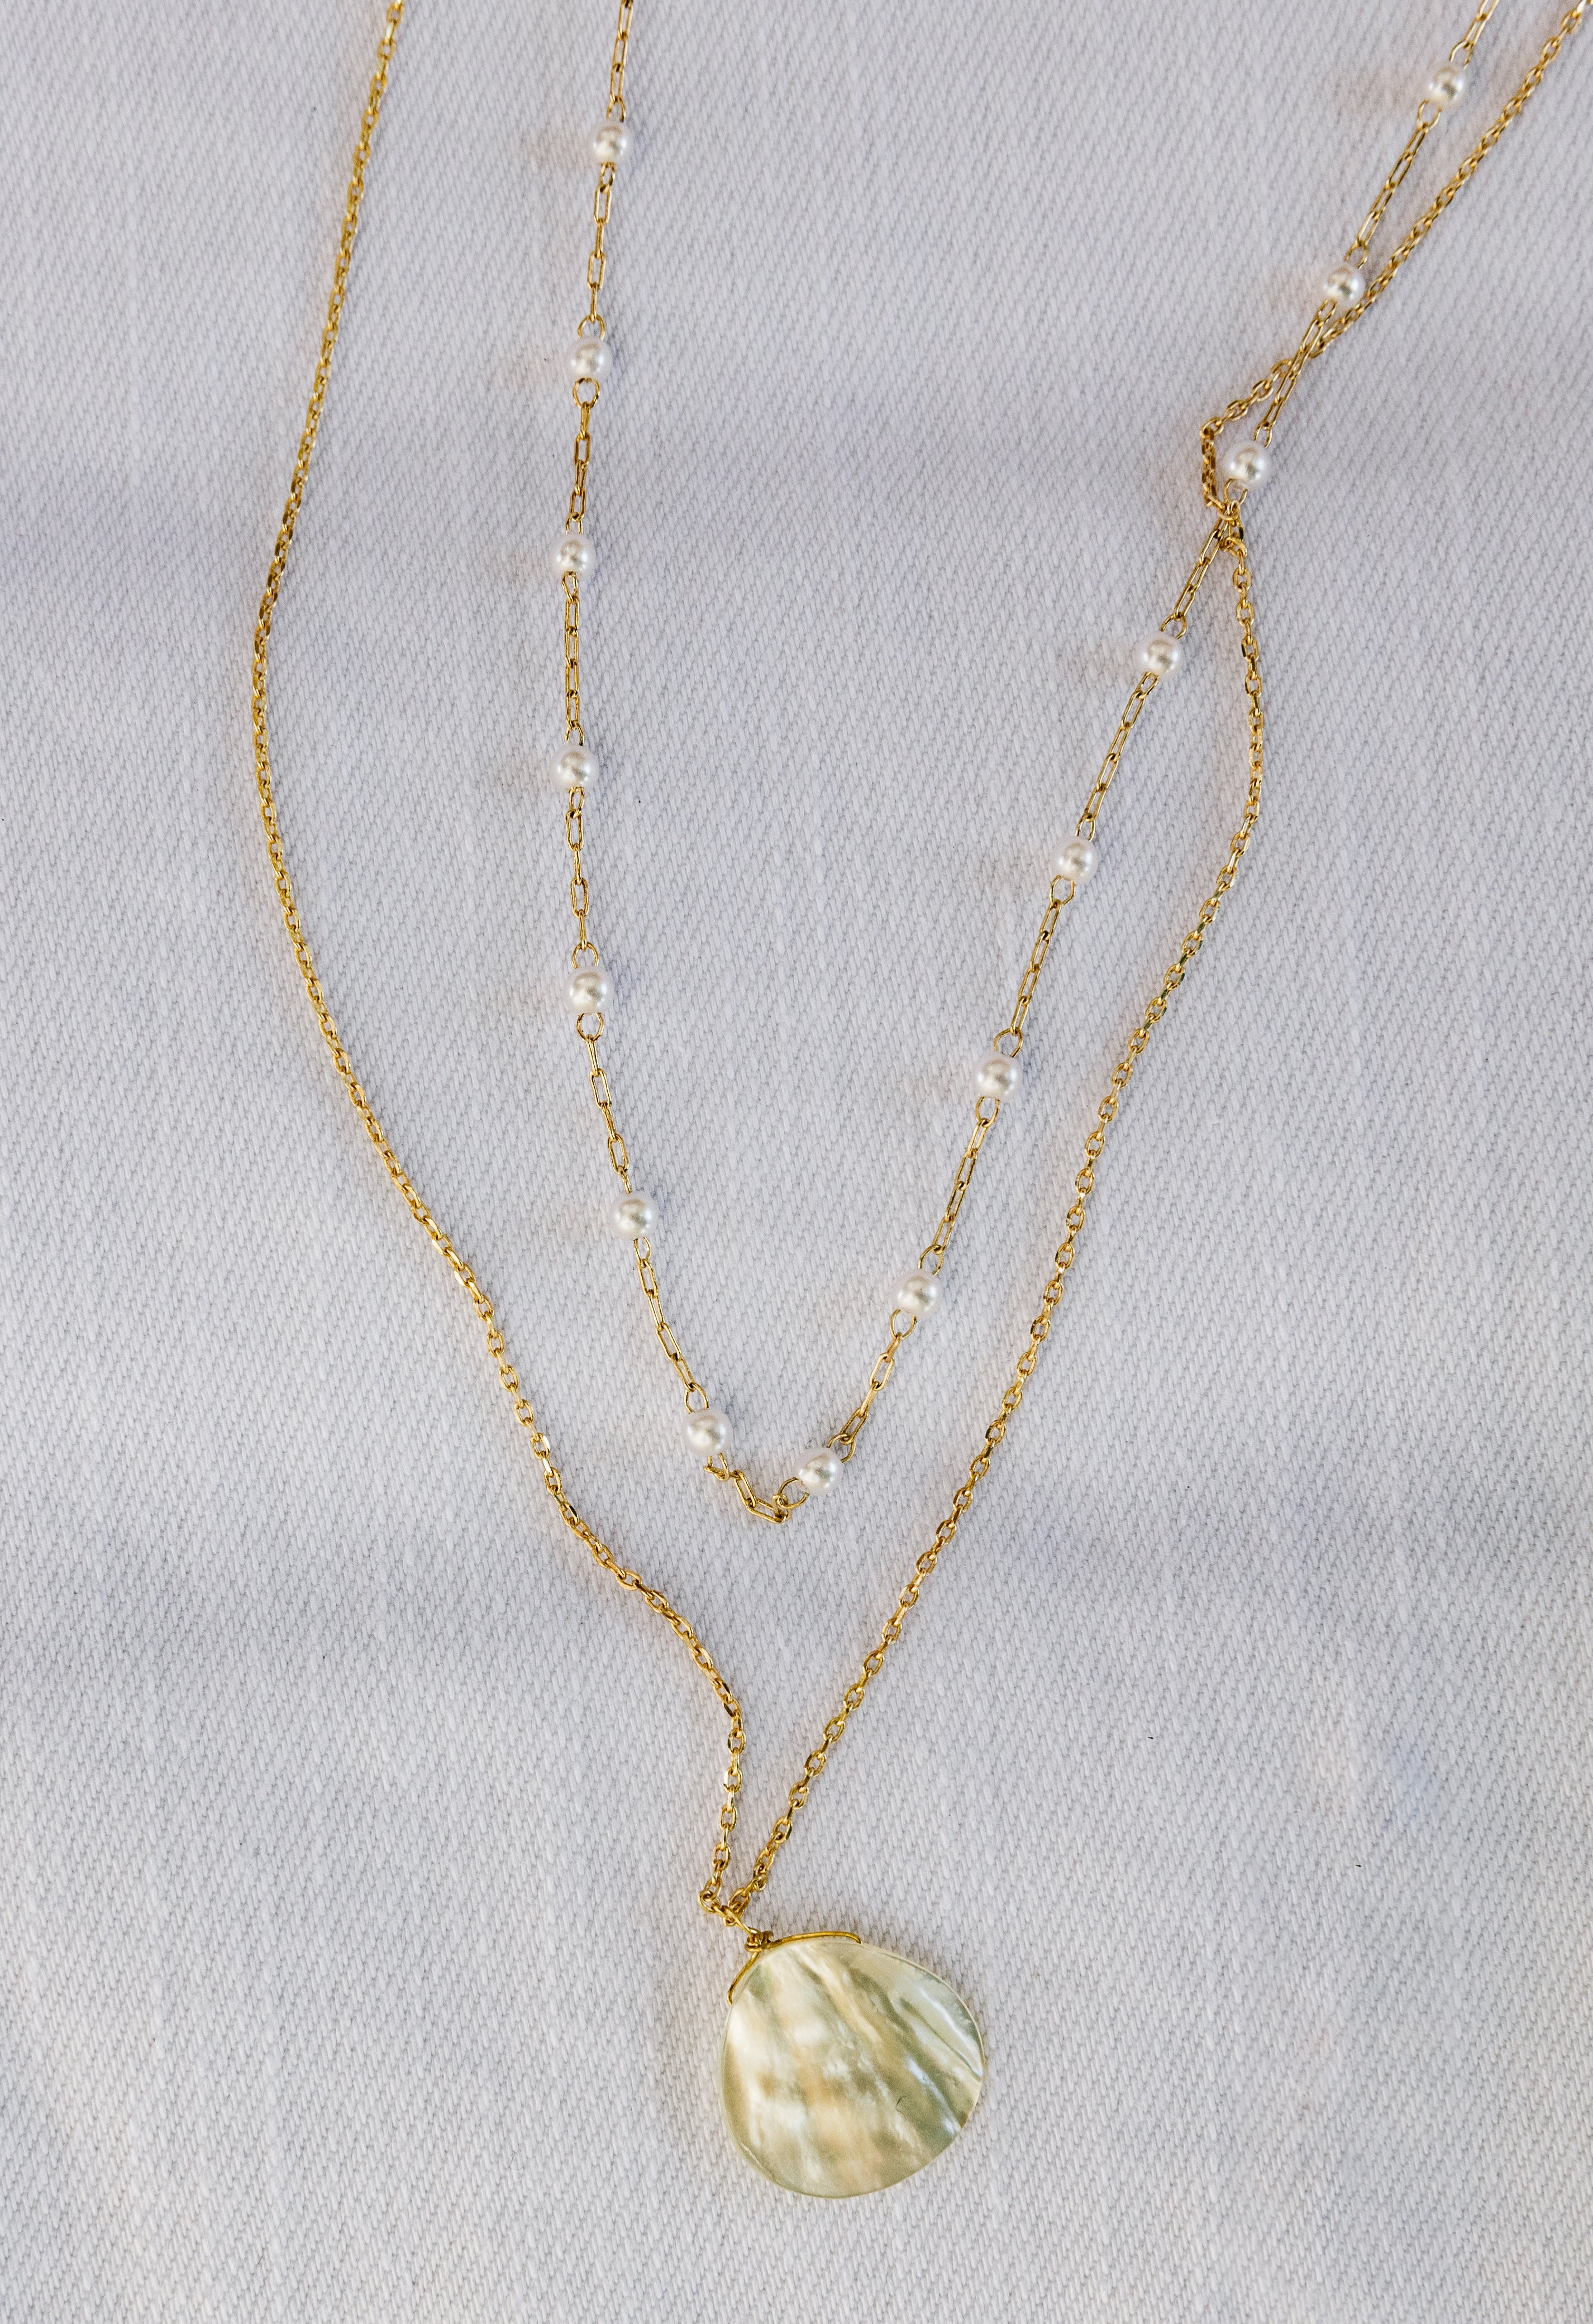 Agate Necklace - GOLD - willows clothing NECKLACE